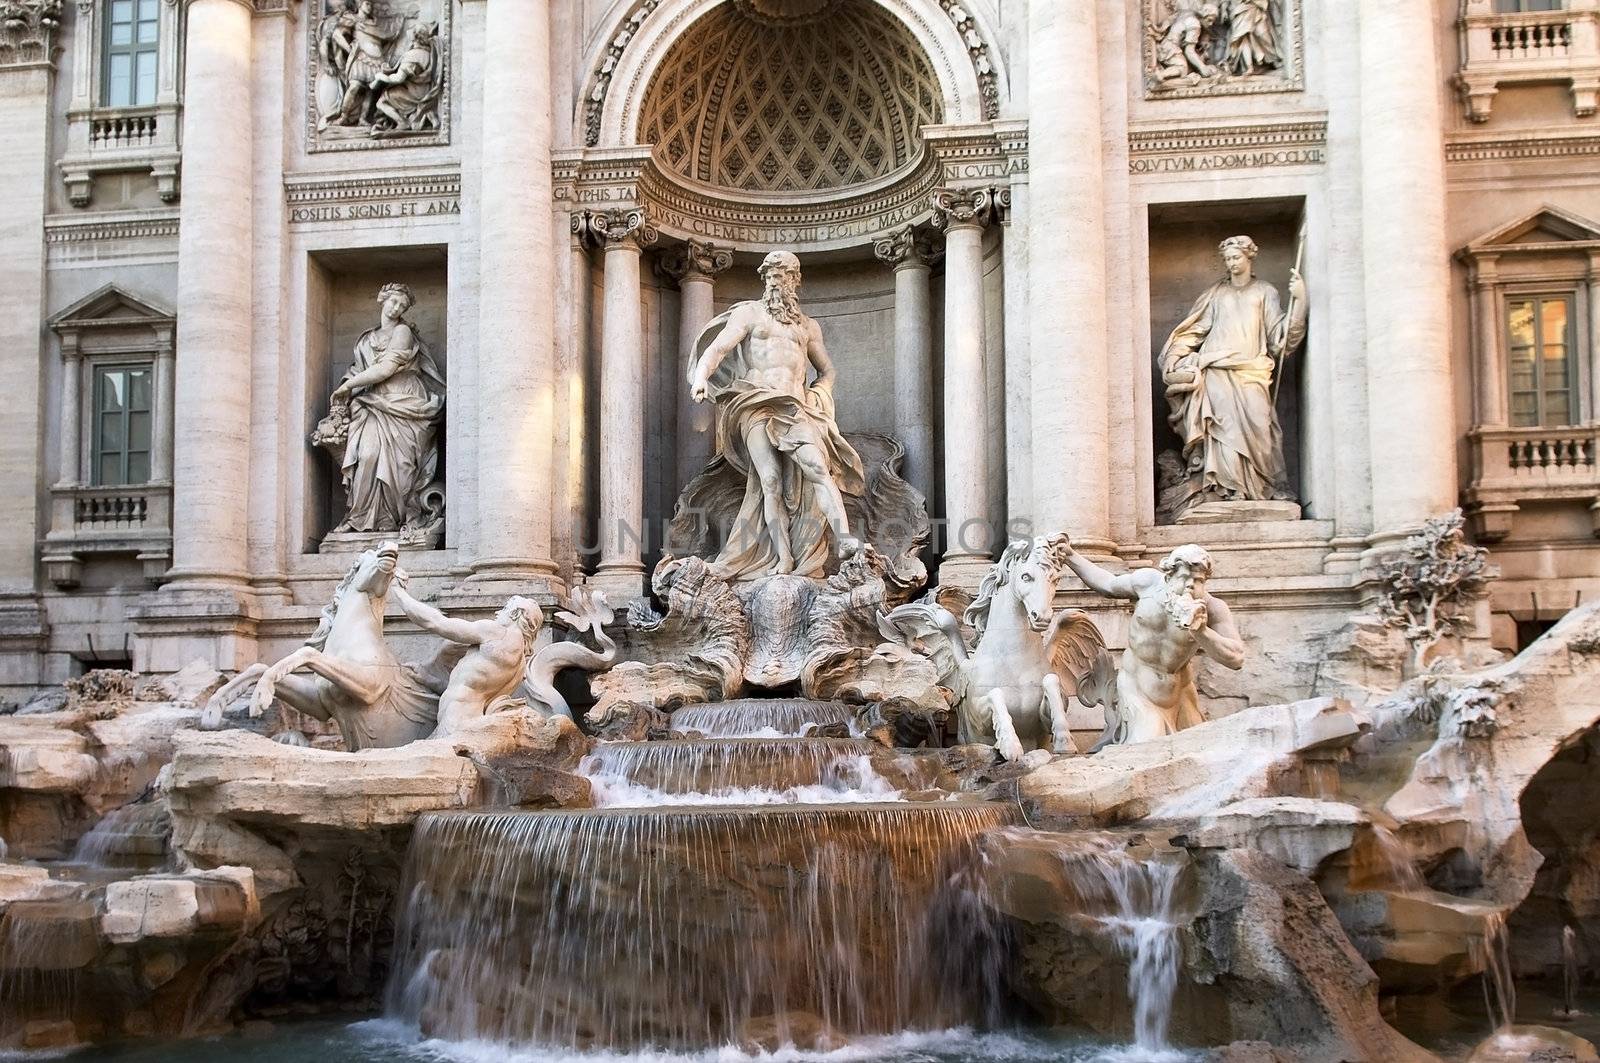 Trevi fountain,the most famous fountain in Rome